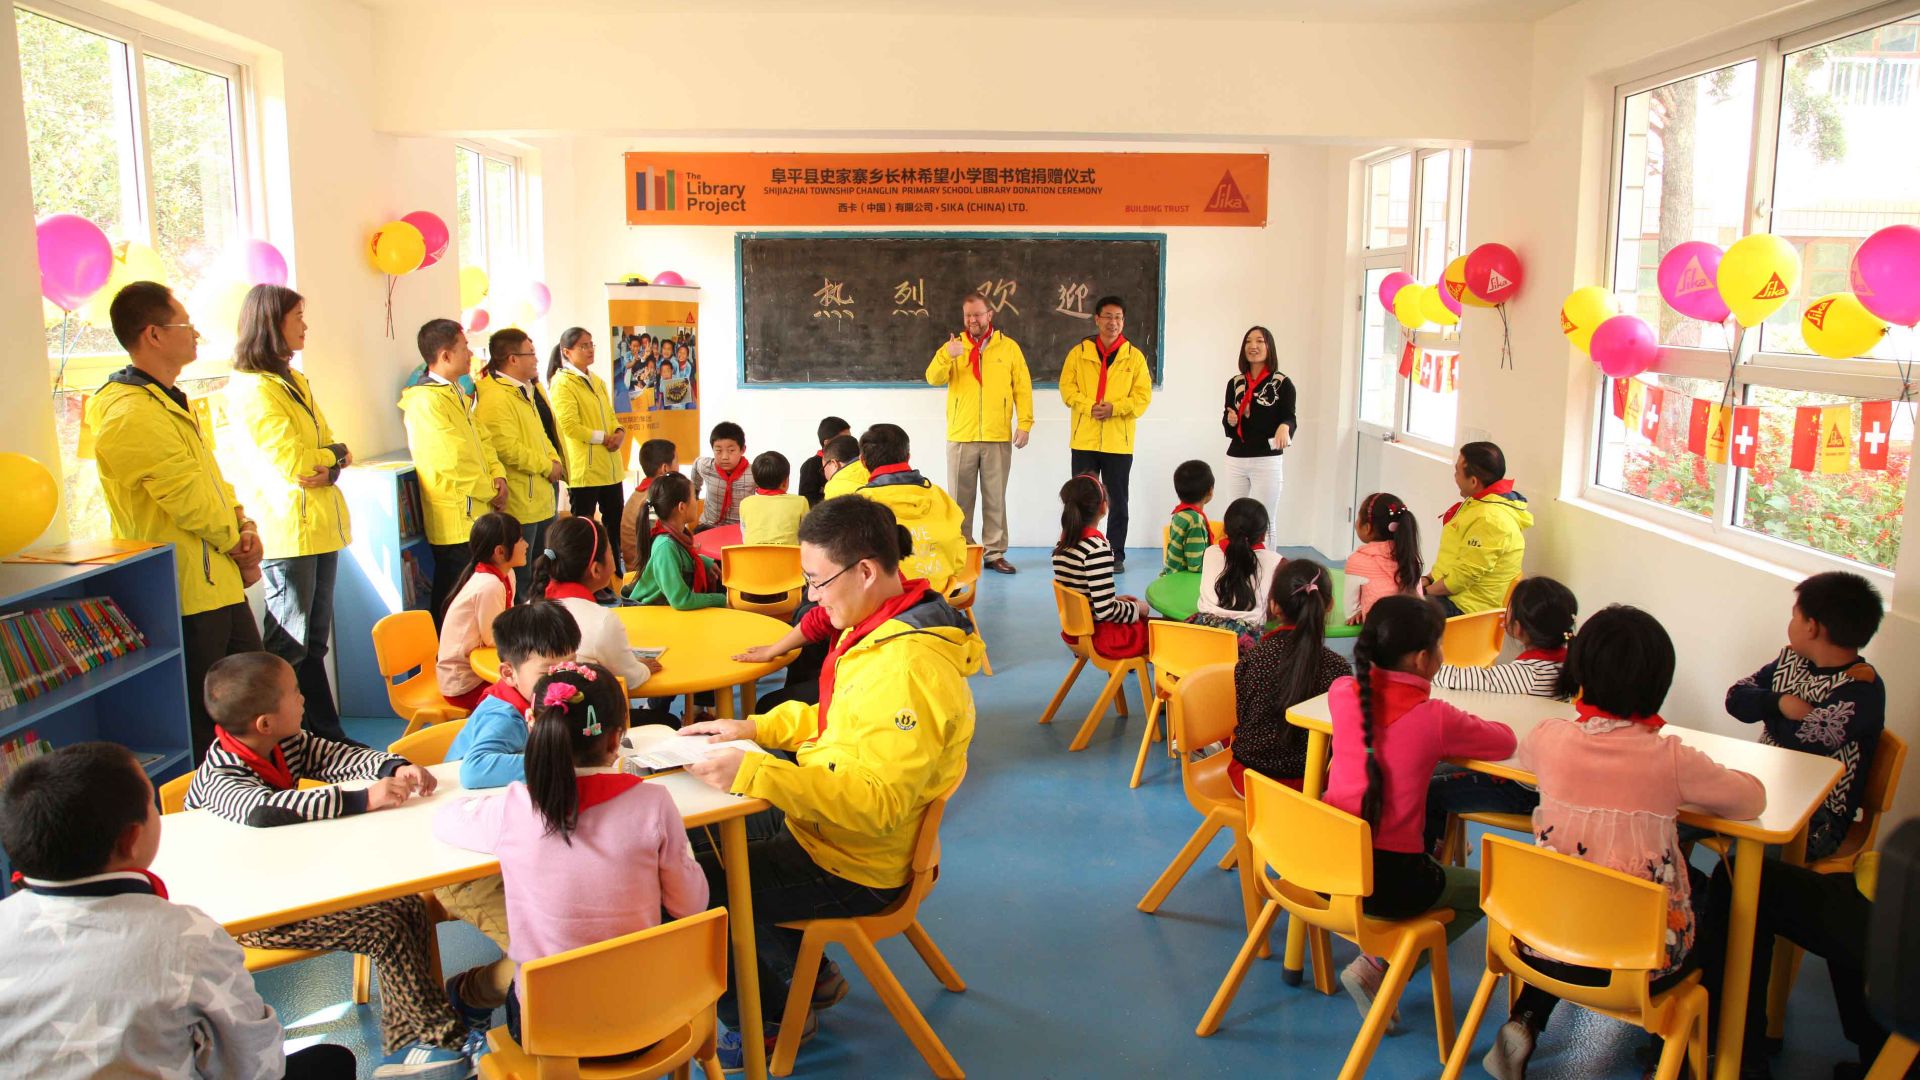 Sika helped to create reading rooms and corners in 99 schools, donating more than 94,000 books.